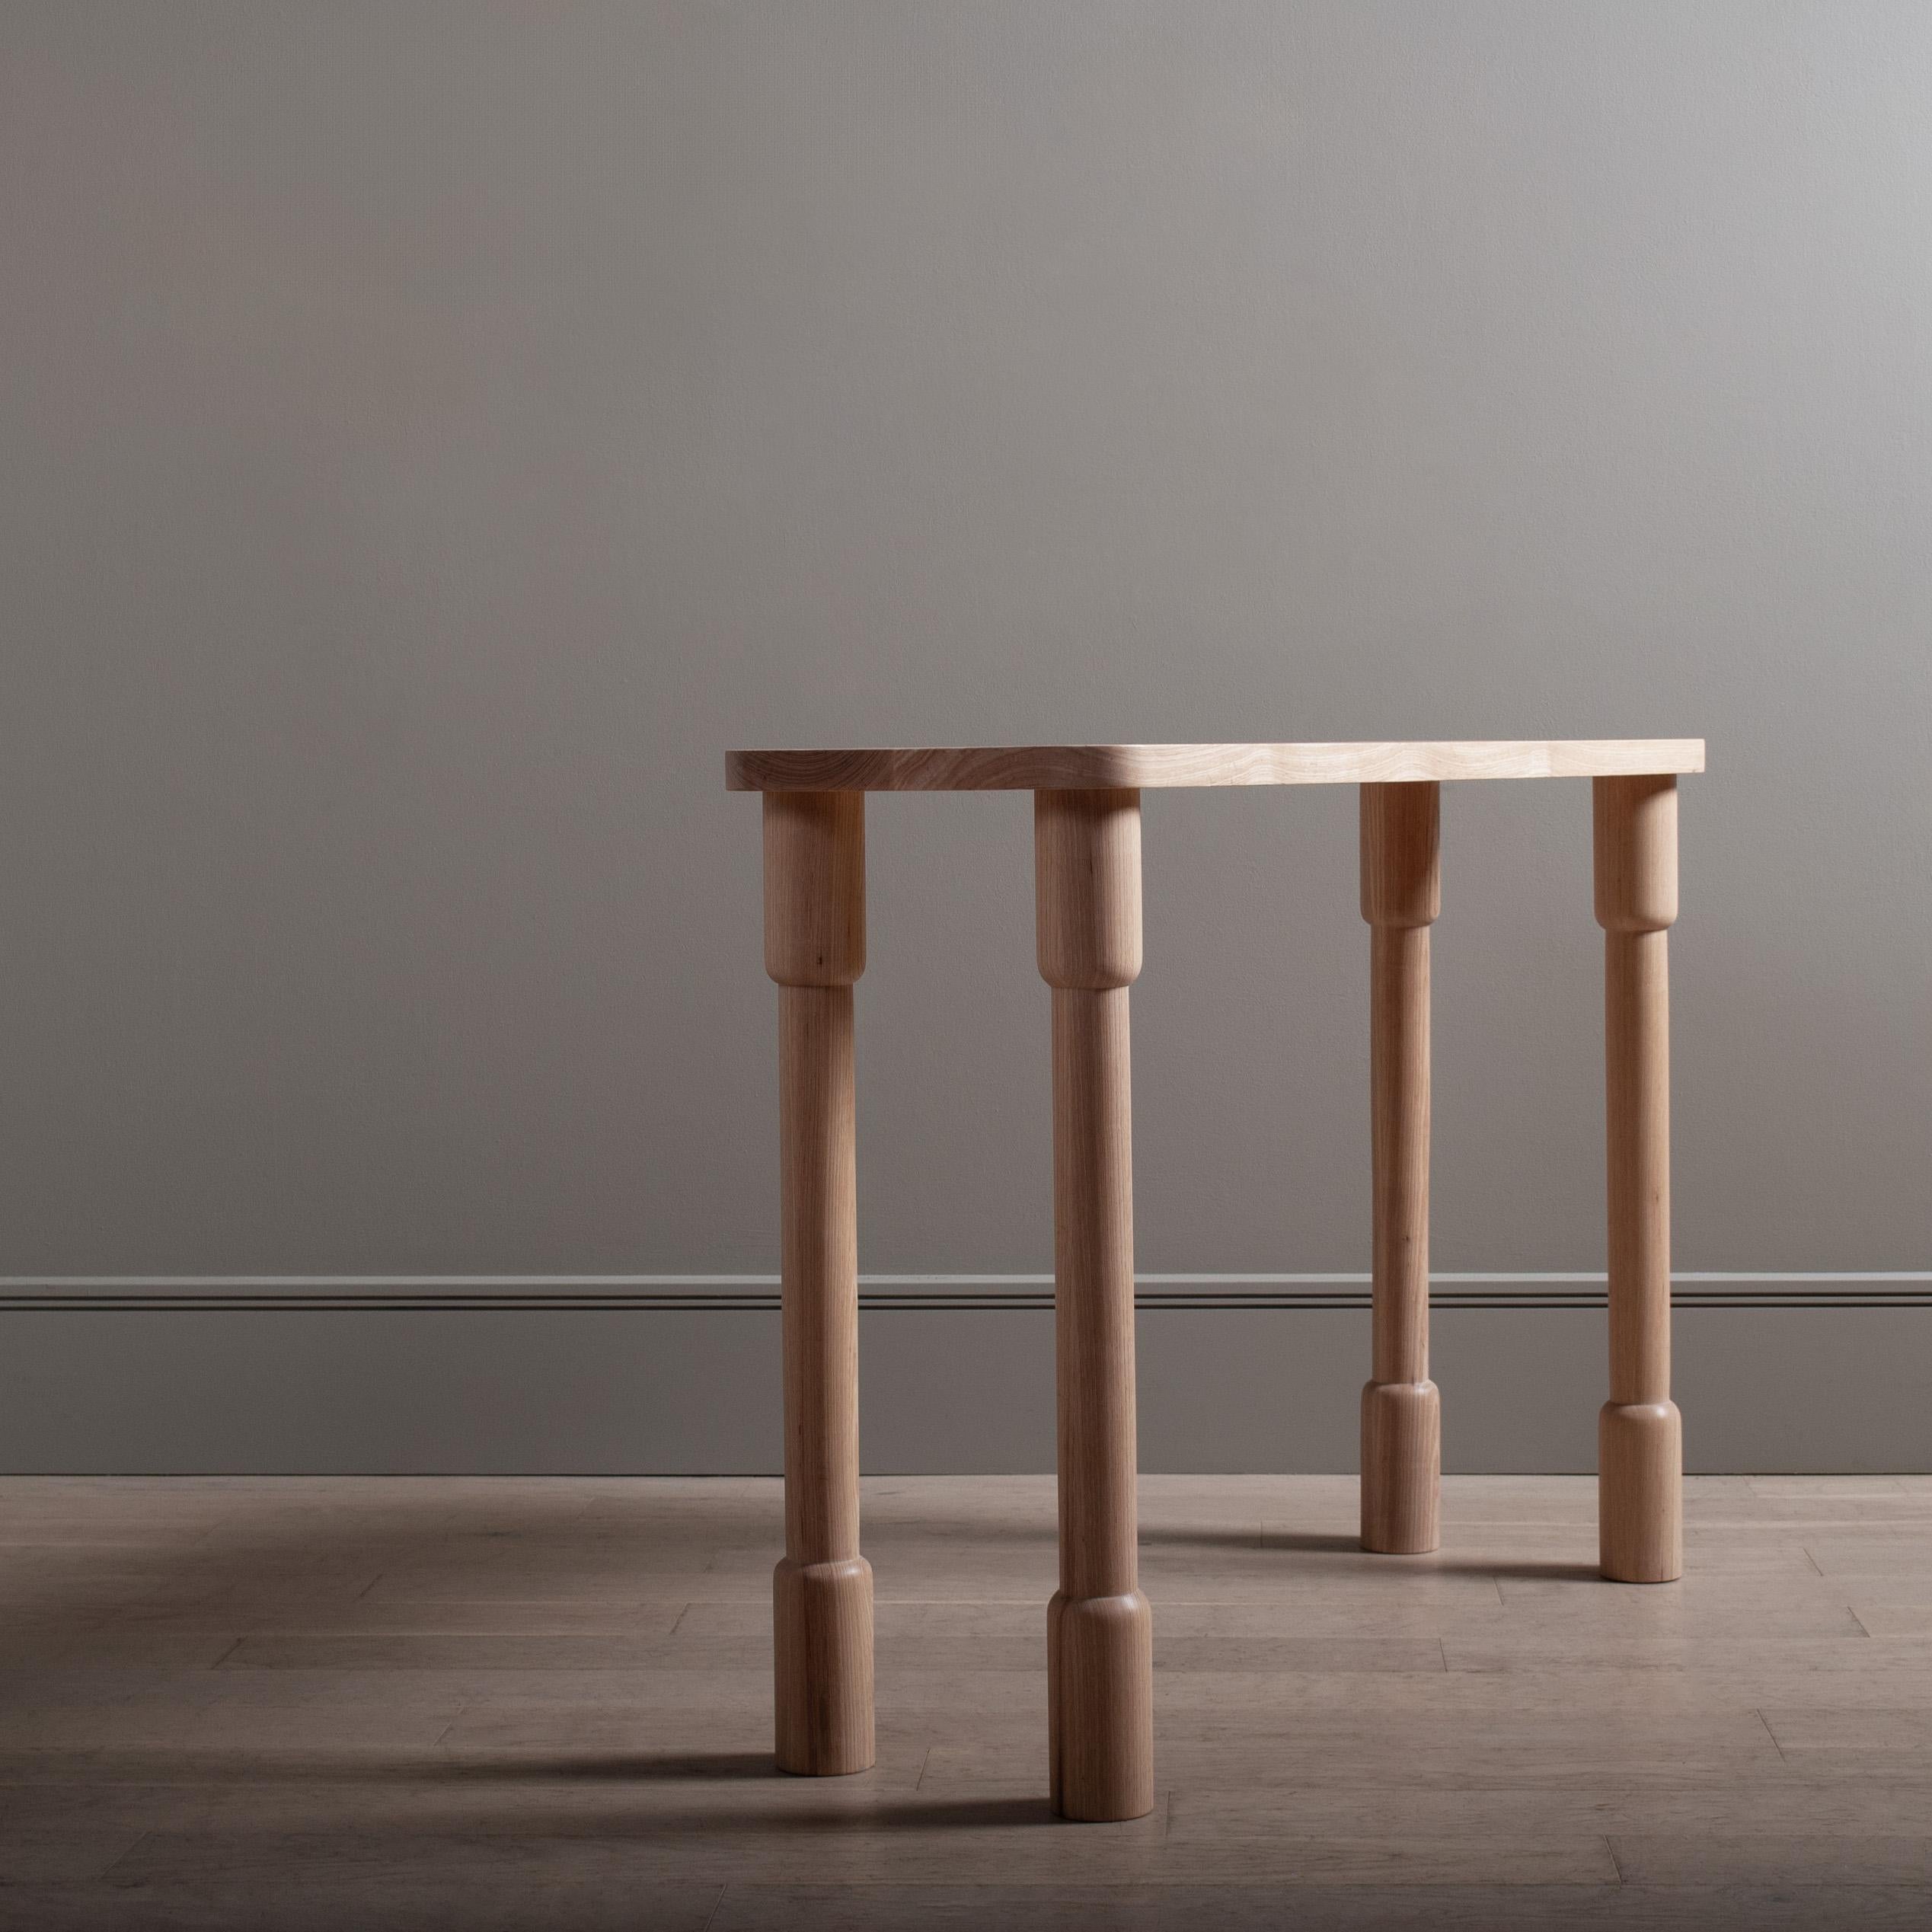 Architectural maunsell table designed and handmade in England using traditional furniture making techniques. Completely handcrafted from prime English ash. Hand-turned legs jointed through and flush to the main surface.
A solid and striking piece of